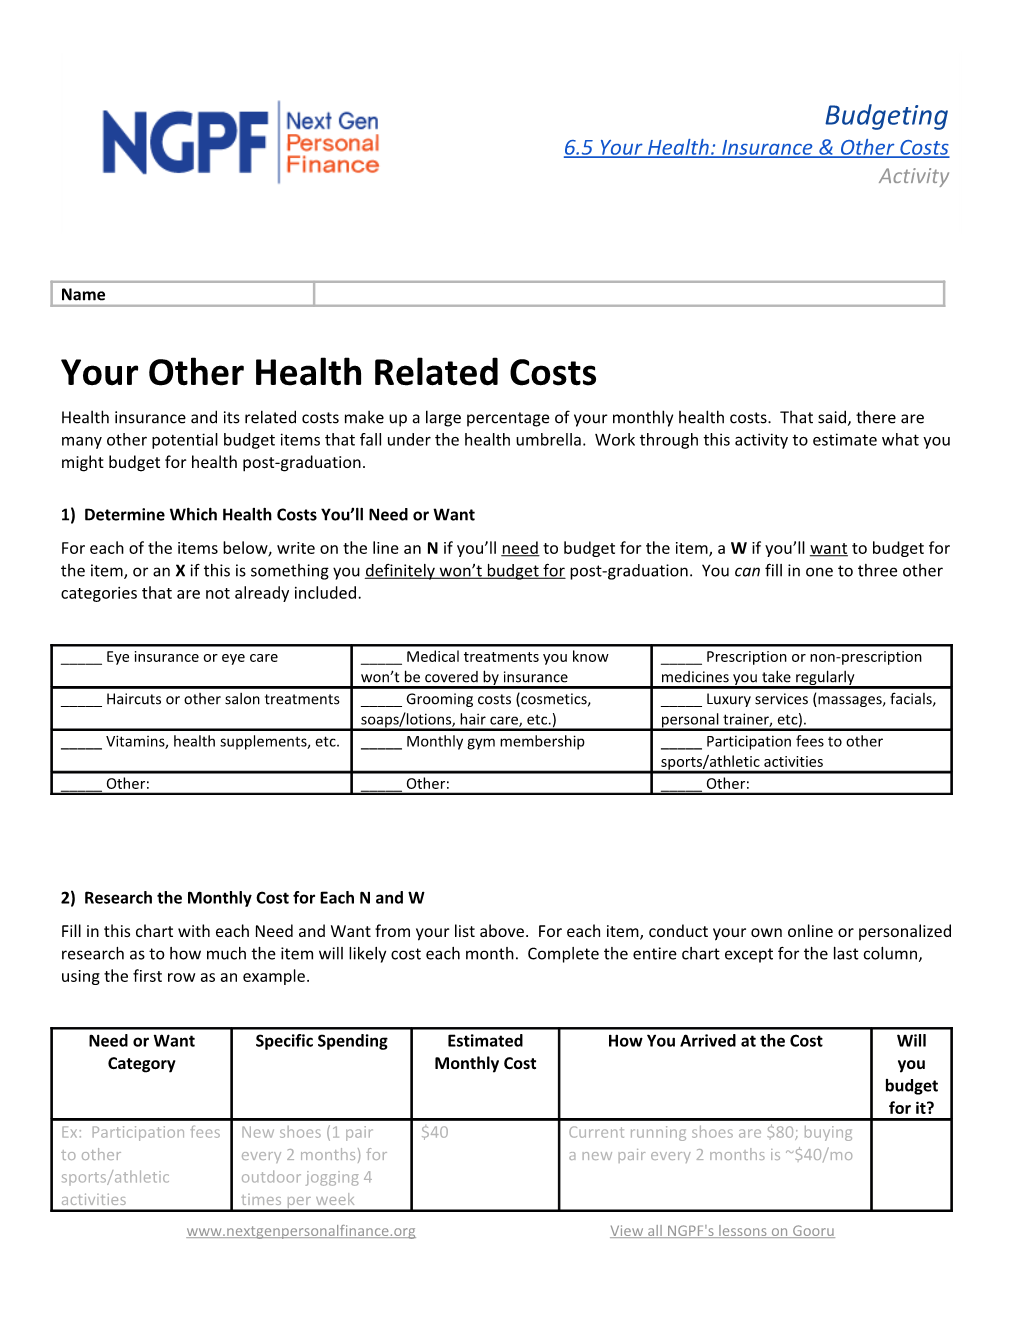 1) Determine Which Health Costs You Ll Need Or Want